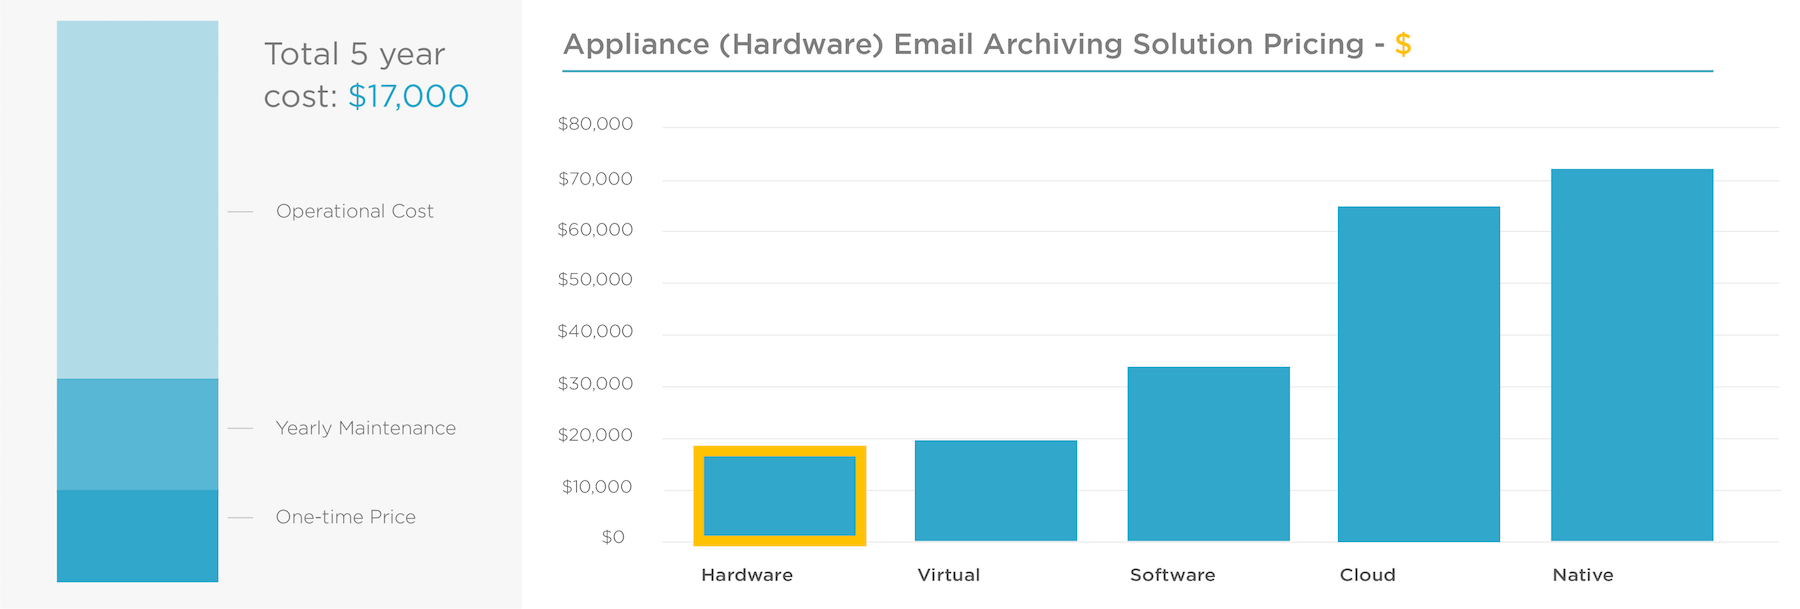 Appliance Hardware Email Archiving Solution Pricing